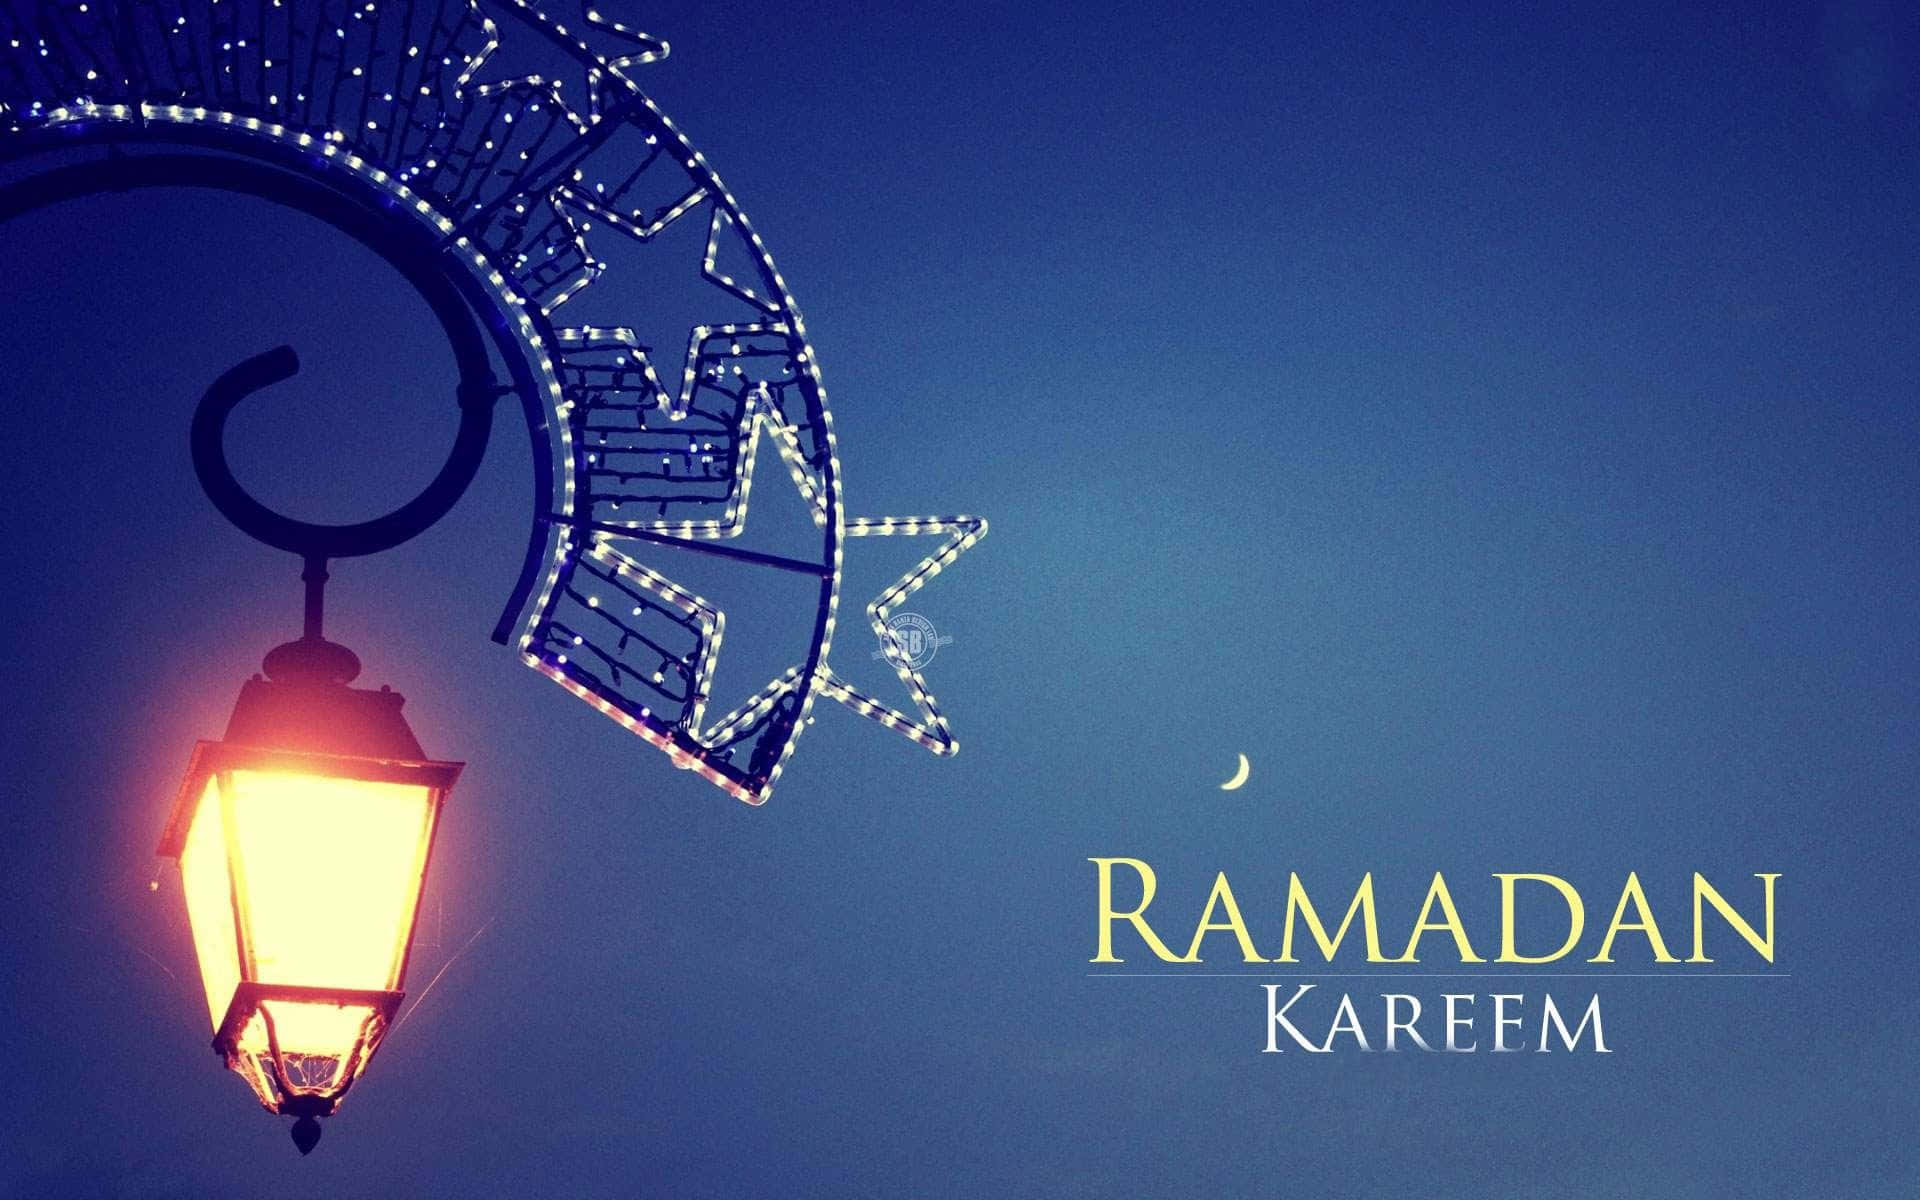 Ramadan Kareem - Celebrate the blessed month with friends and family